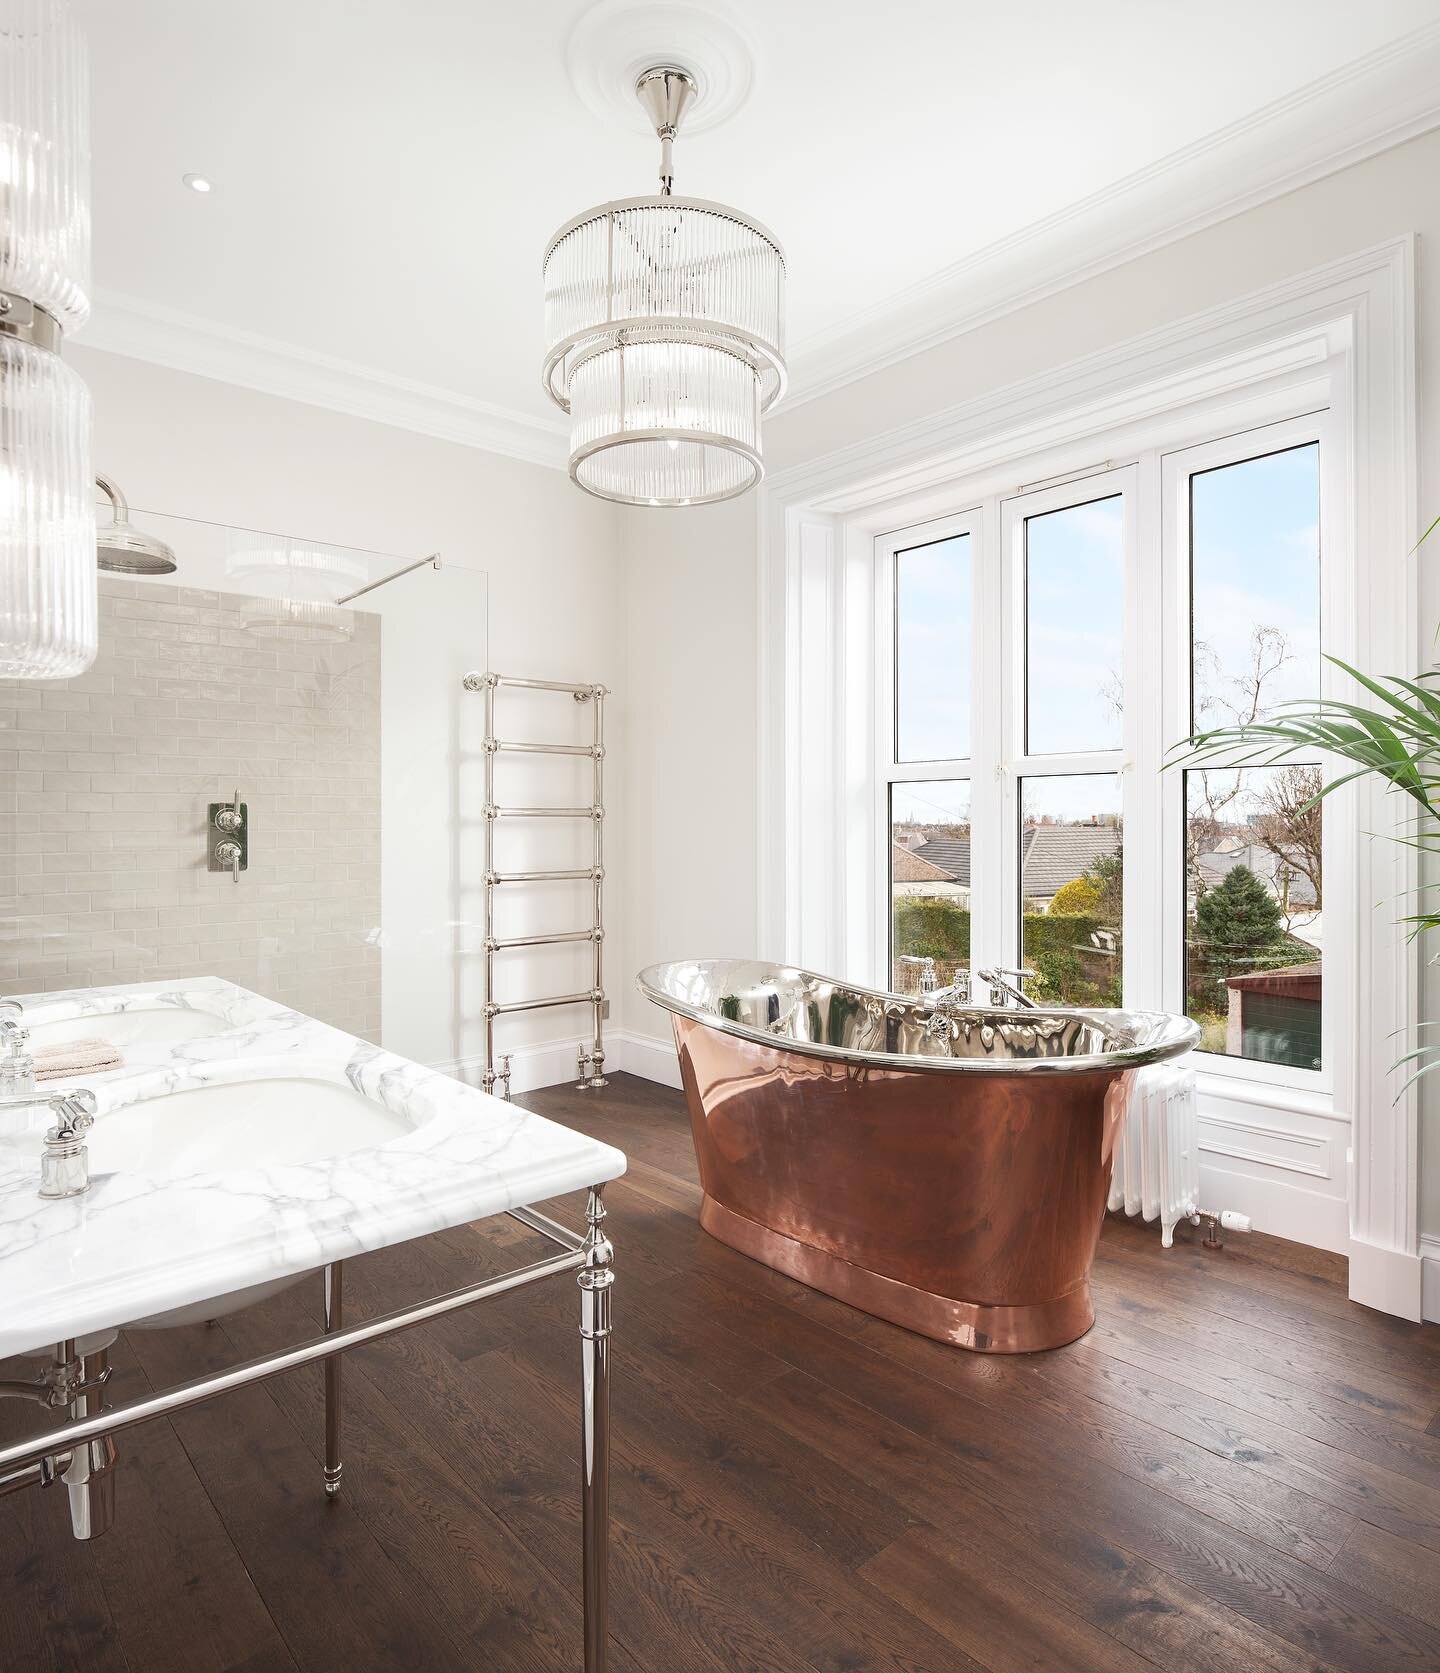 &bull; Copper Elegance&hellip; 

This stunning space flooded with natural light is completed with Drummonds&rsquo; fittings, from freestanding bath to vanity suite lighting. The Tyne Copper Bath Tub is simply breathtaking, as is the view seen from th